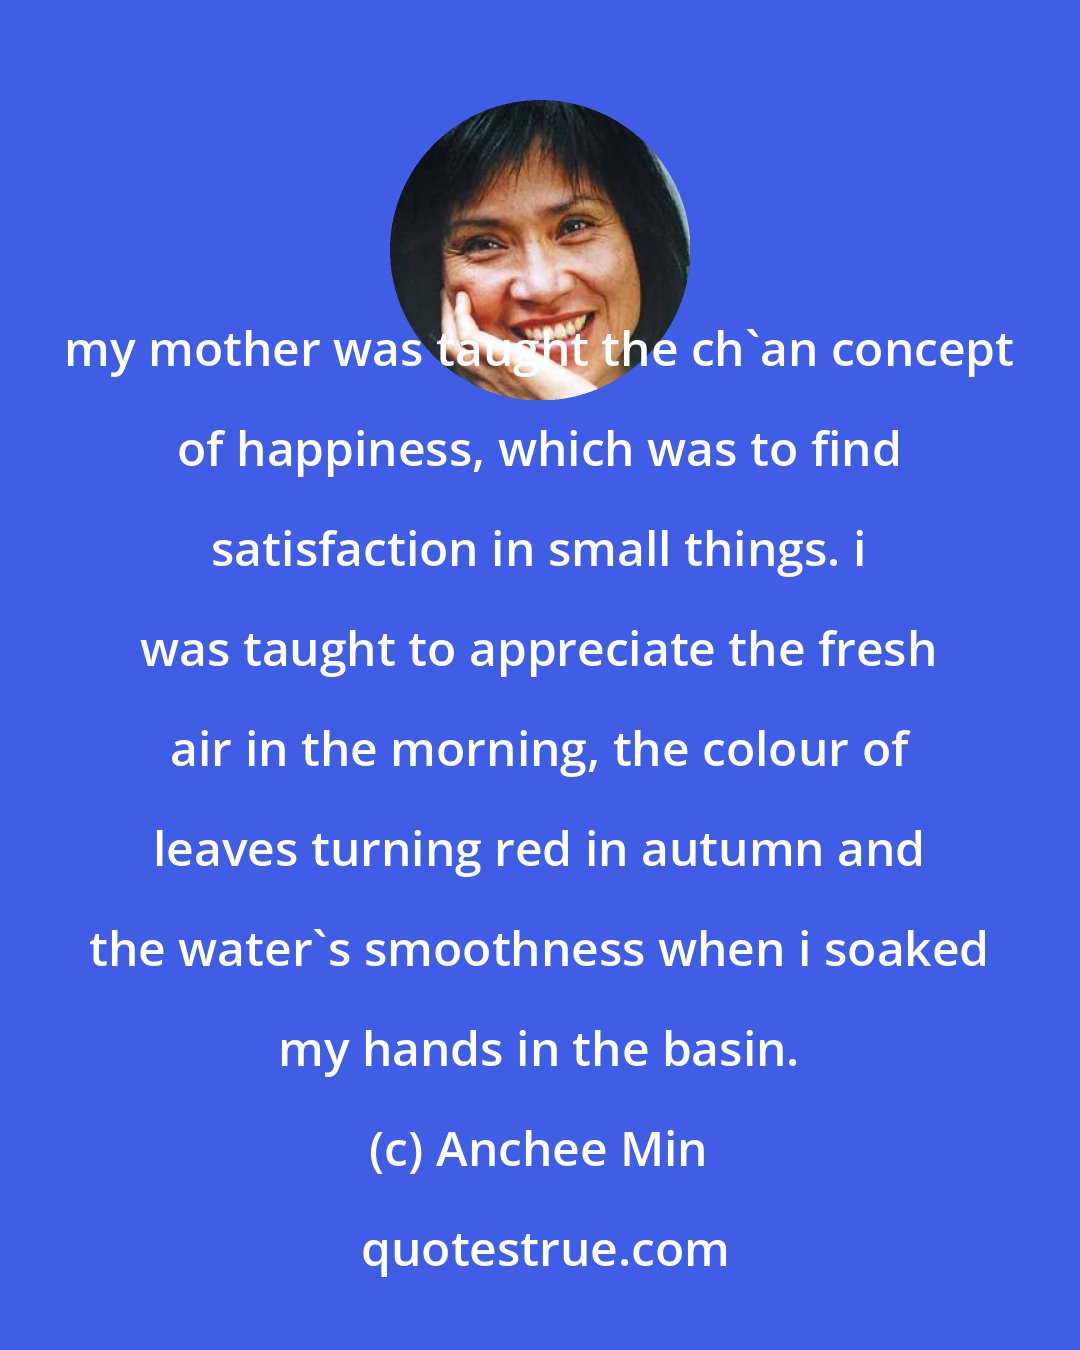 Anchee Min: my mother was taught the ch'an concept of happiness, which was to find satisfaction in small things. i was taught to appreciate the fresh air in the morning, the colour of leaves turning red in autumn and the water's smoothness when i soaked my hands in the basin.